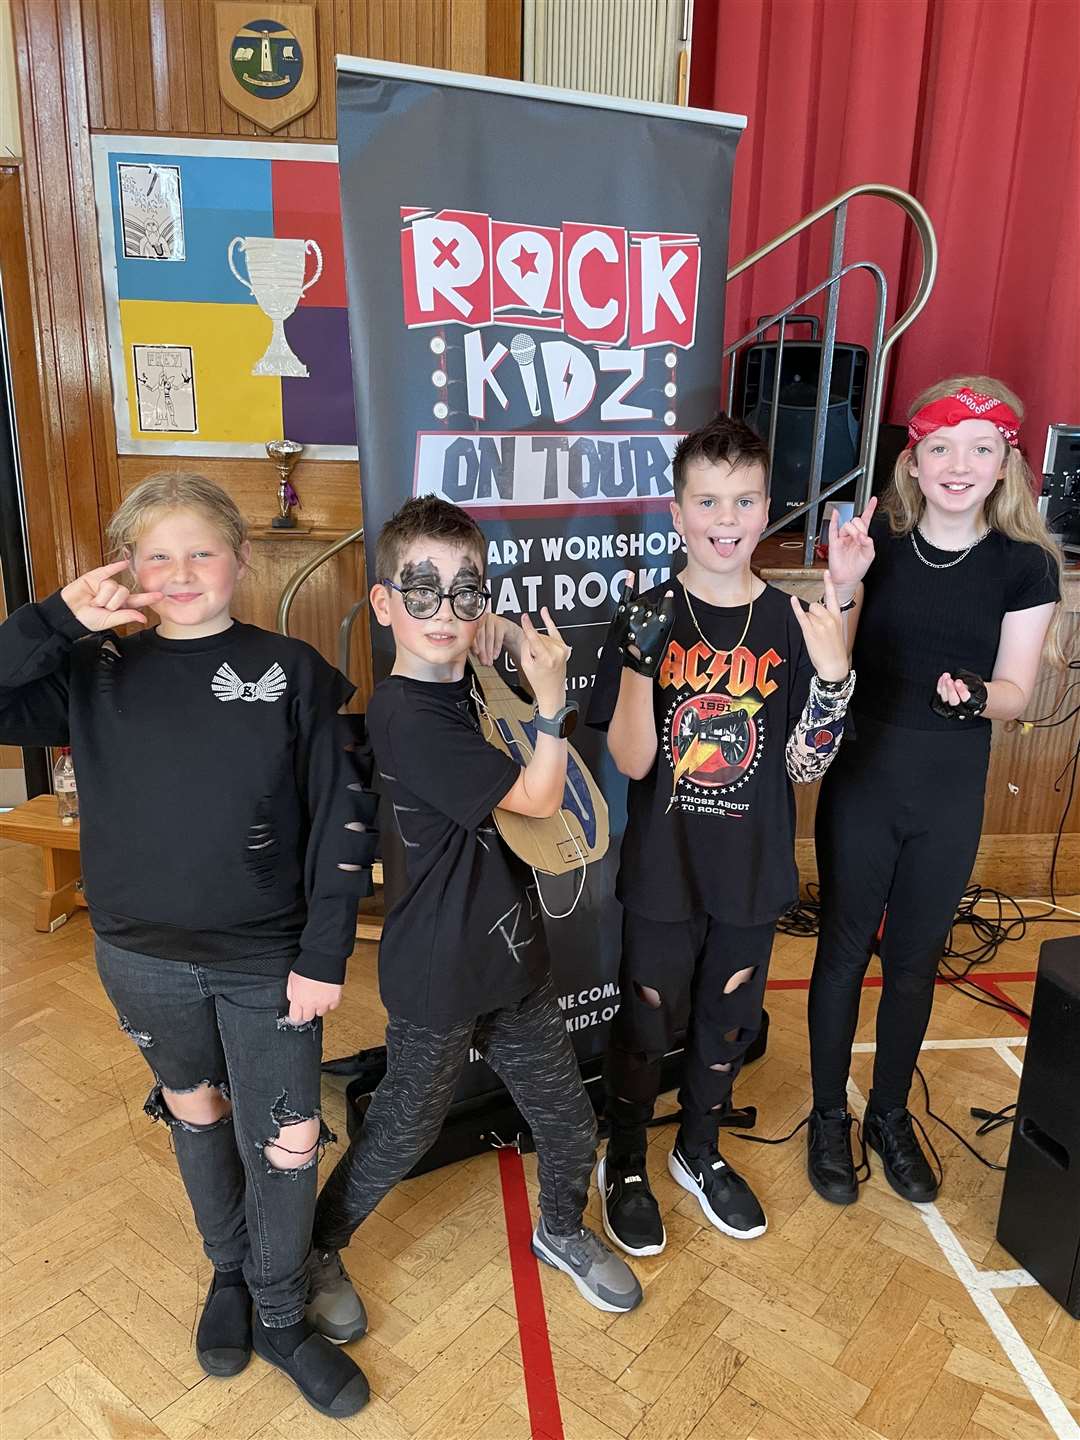 Pupils dressed up as rock stars for the day.